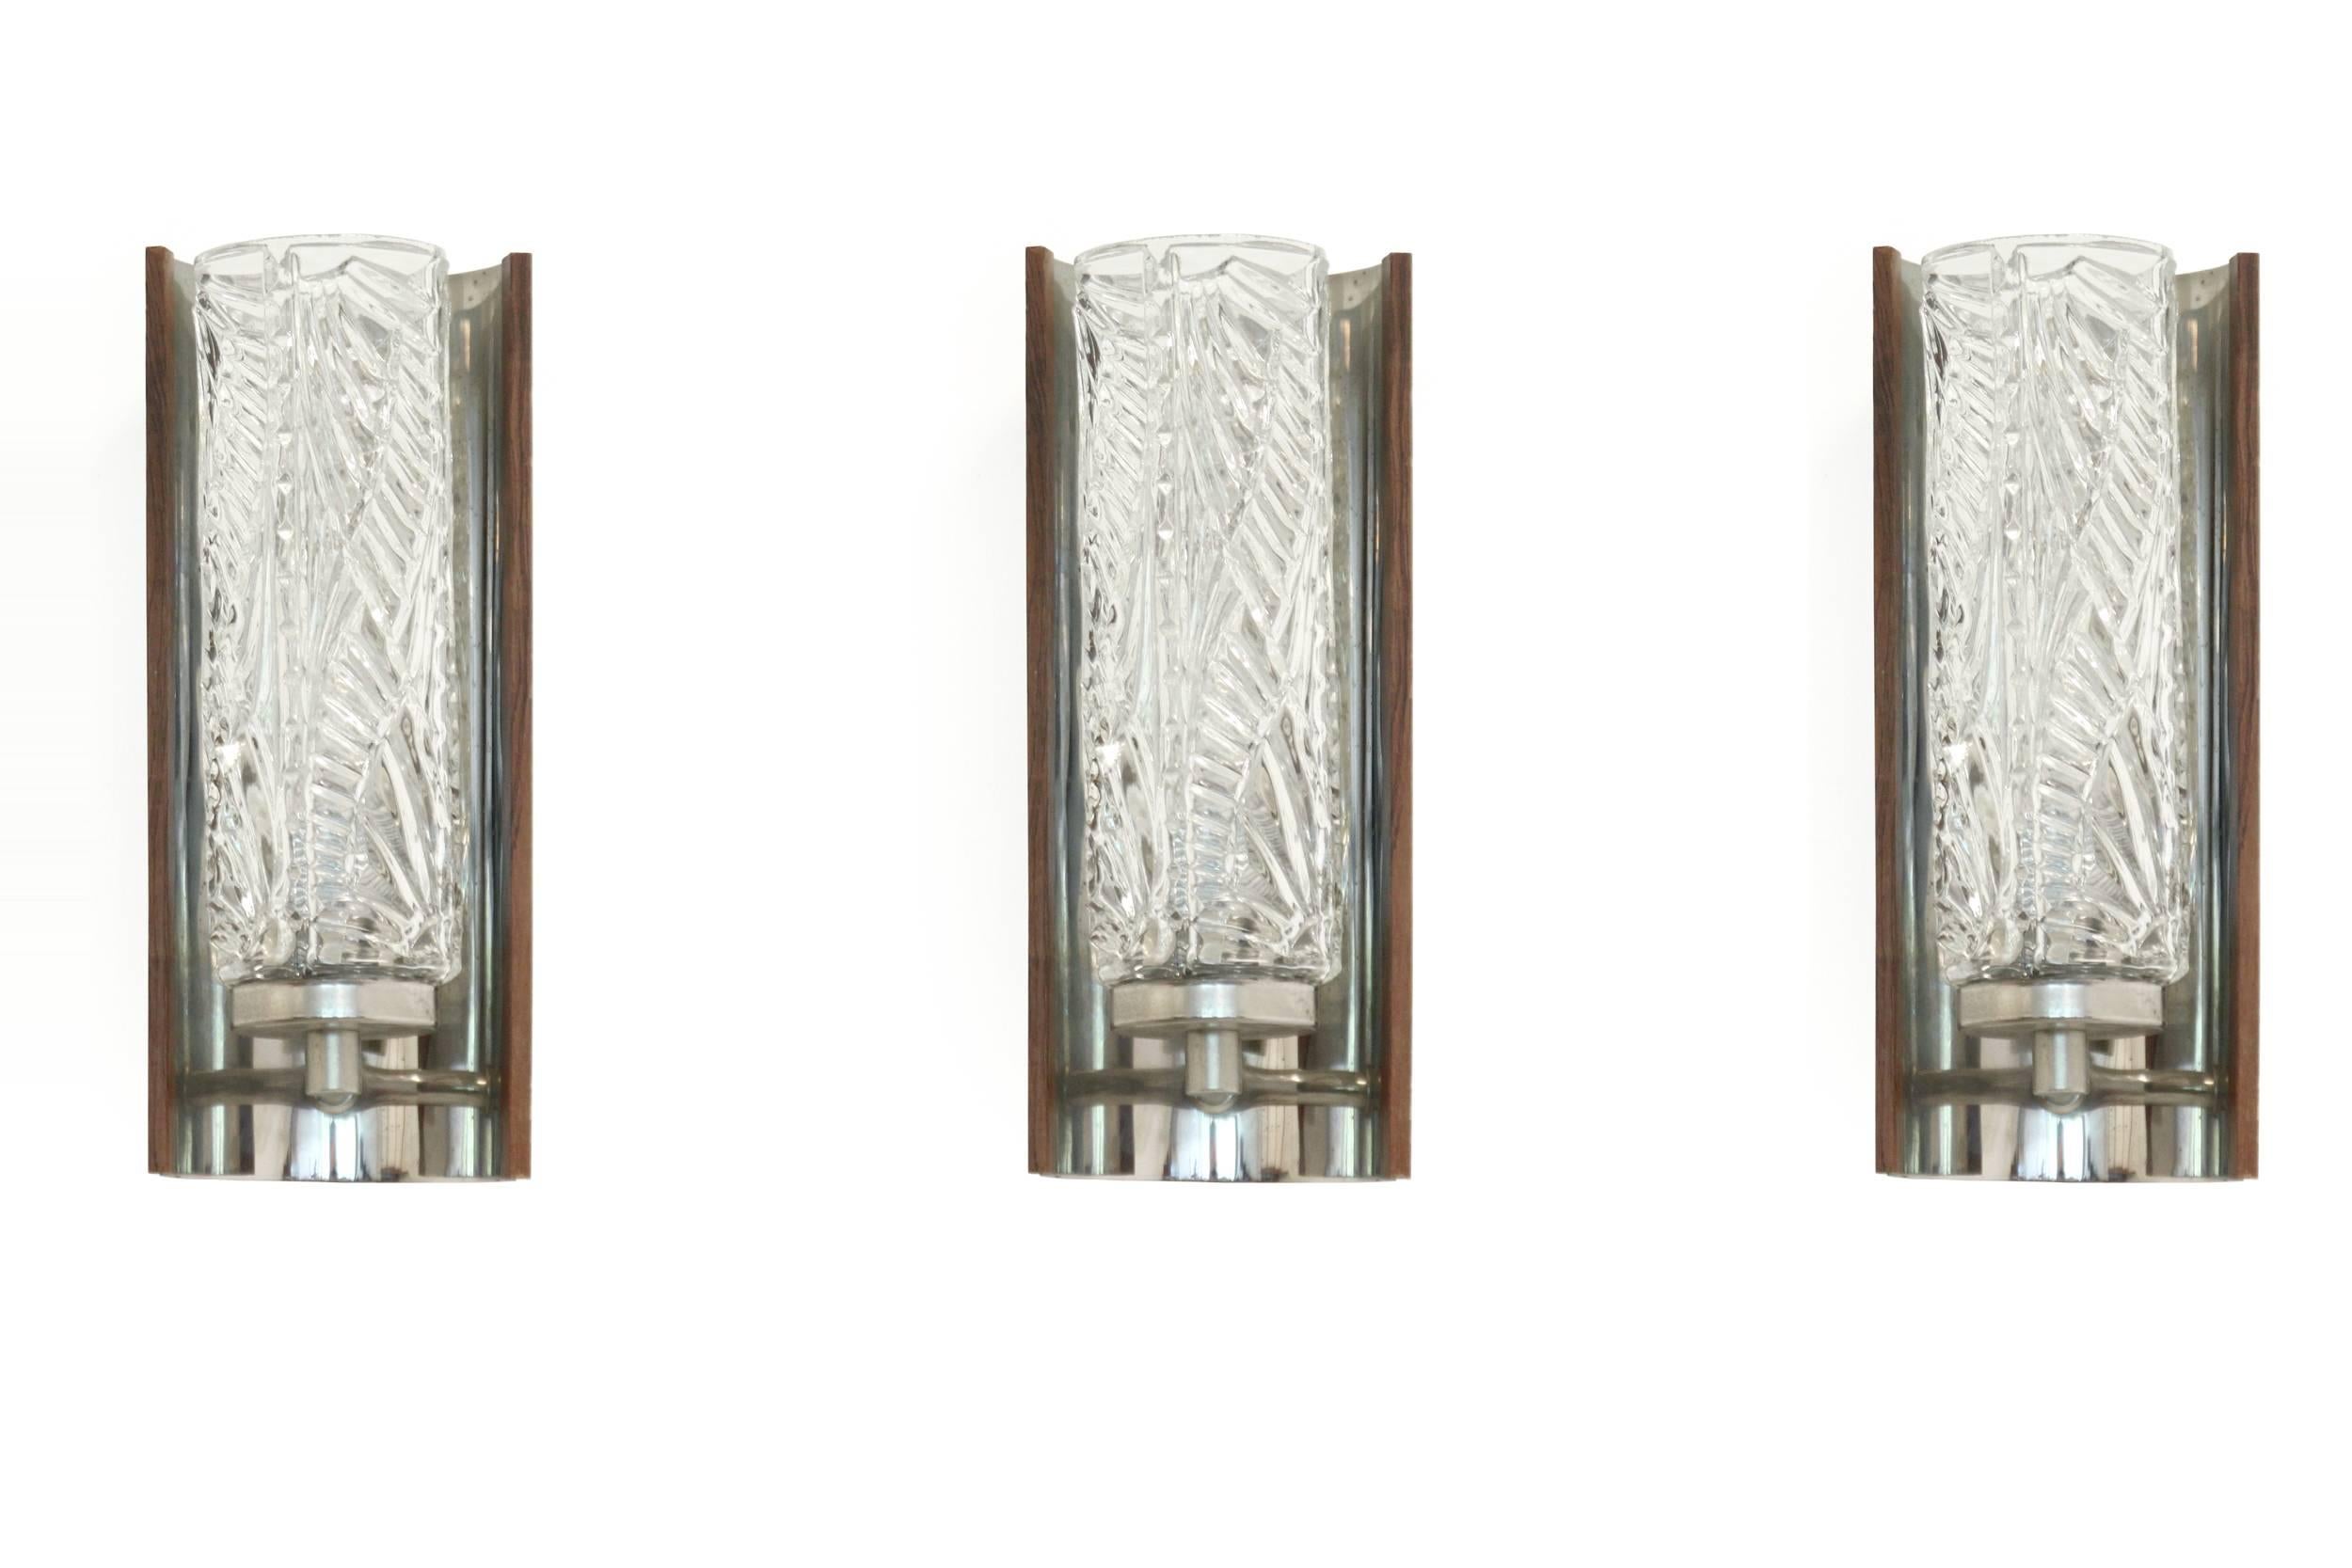 Set of three wall lights on a chromed frame with rosewood details and crystalized glass shades.

Most likely designed and made in Denmark ca 1970s second half.

All lamps are fully working and in good vintage condition.